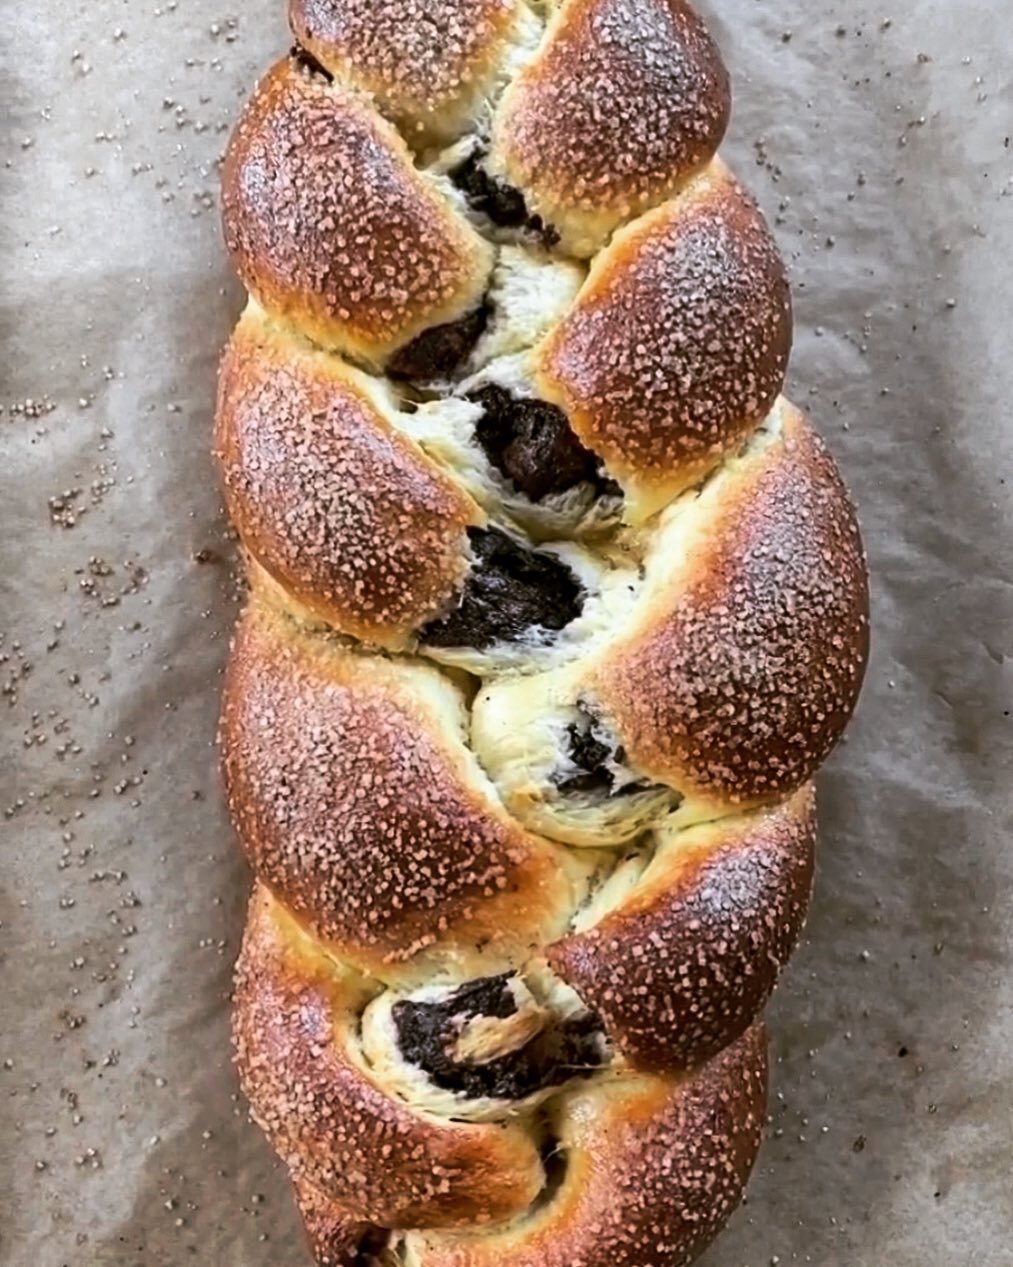 Made Babkallah, a mashup of babka/challah and one of my favorite treats, over on @instagram last week &mdash; the recipe originally appeared in the 2015 holiday issue of @bonappetitmag (you can find it online) and a slightly updated version is in my 